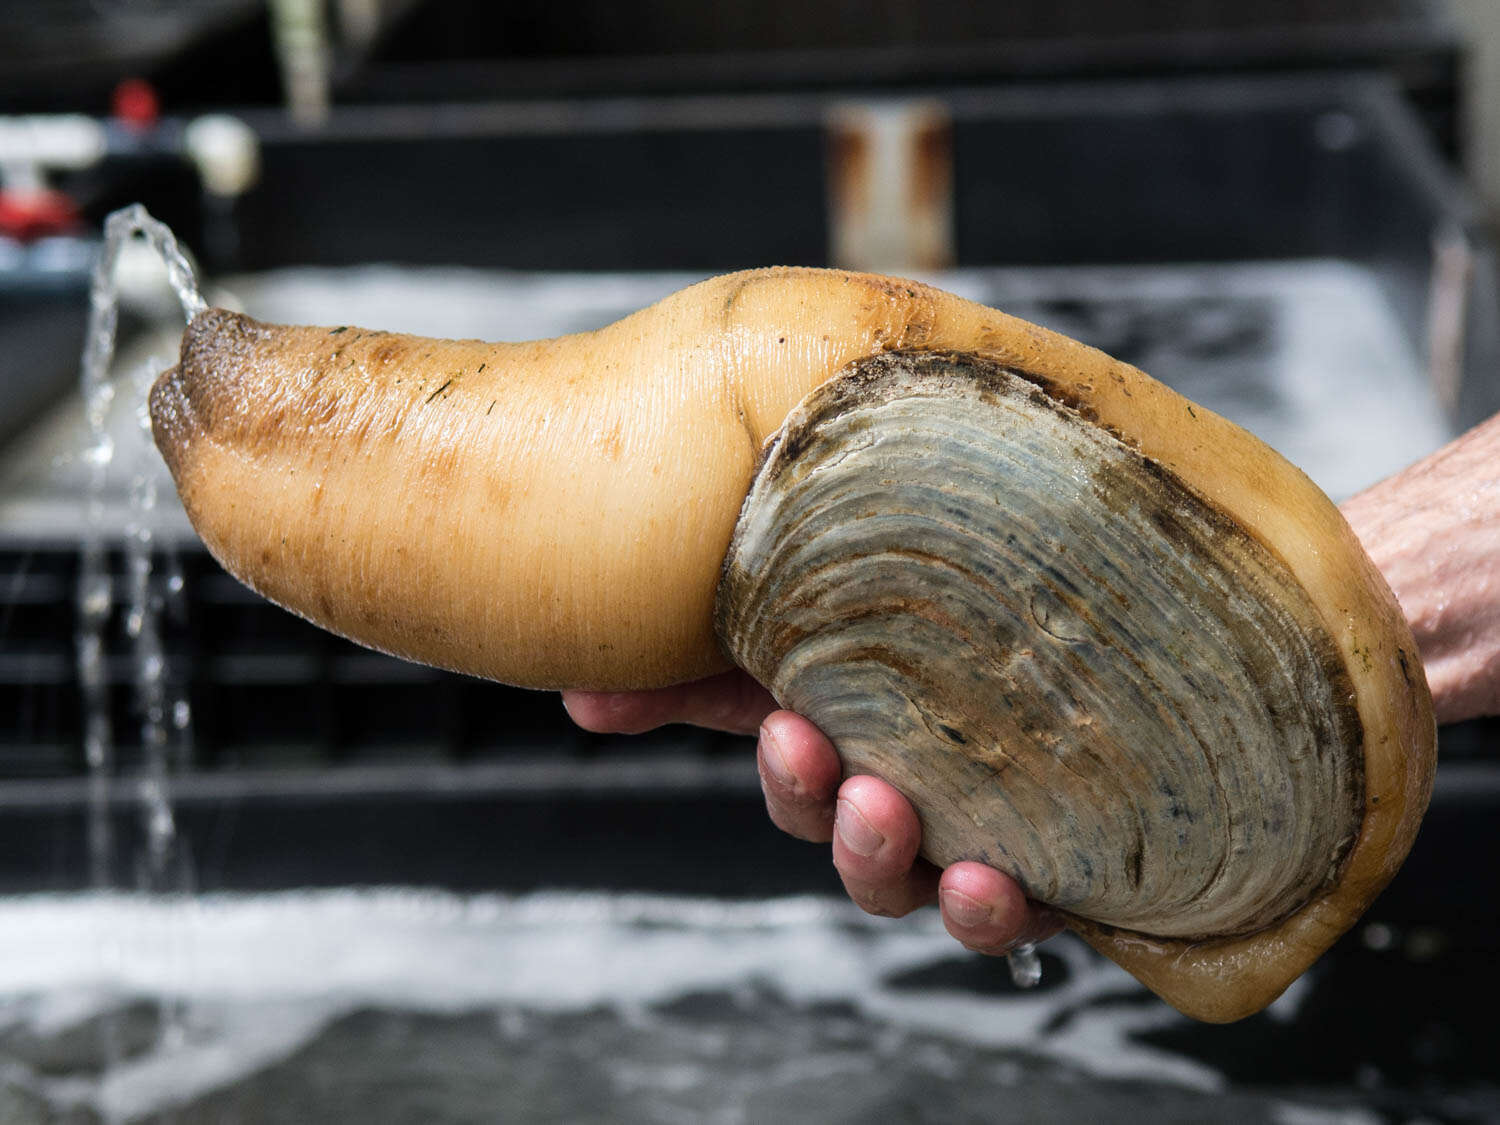 A geoduck clam squirting out water